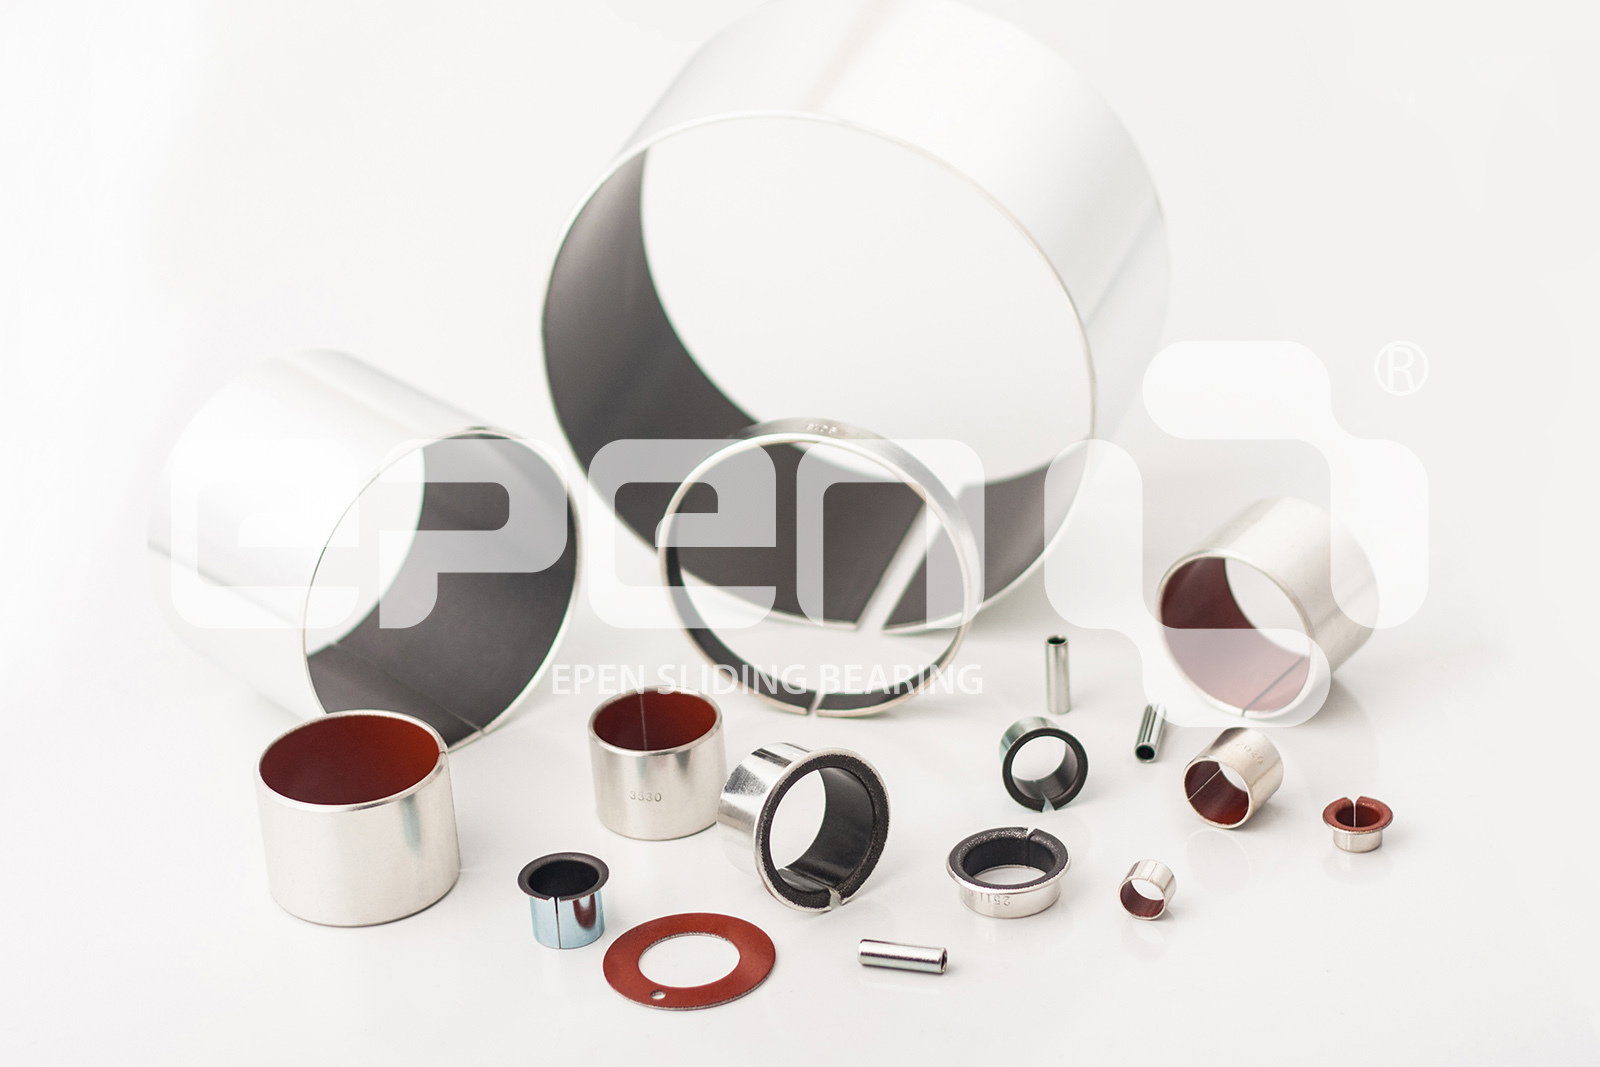 EU PTFE lined Stainless Steel base Bearing